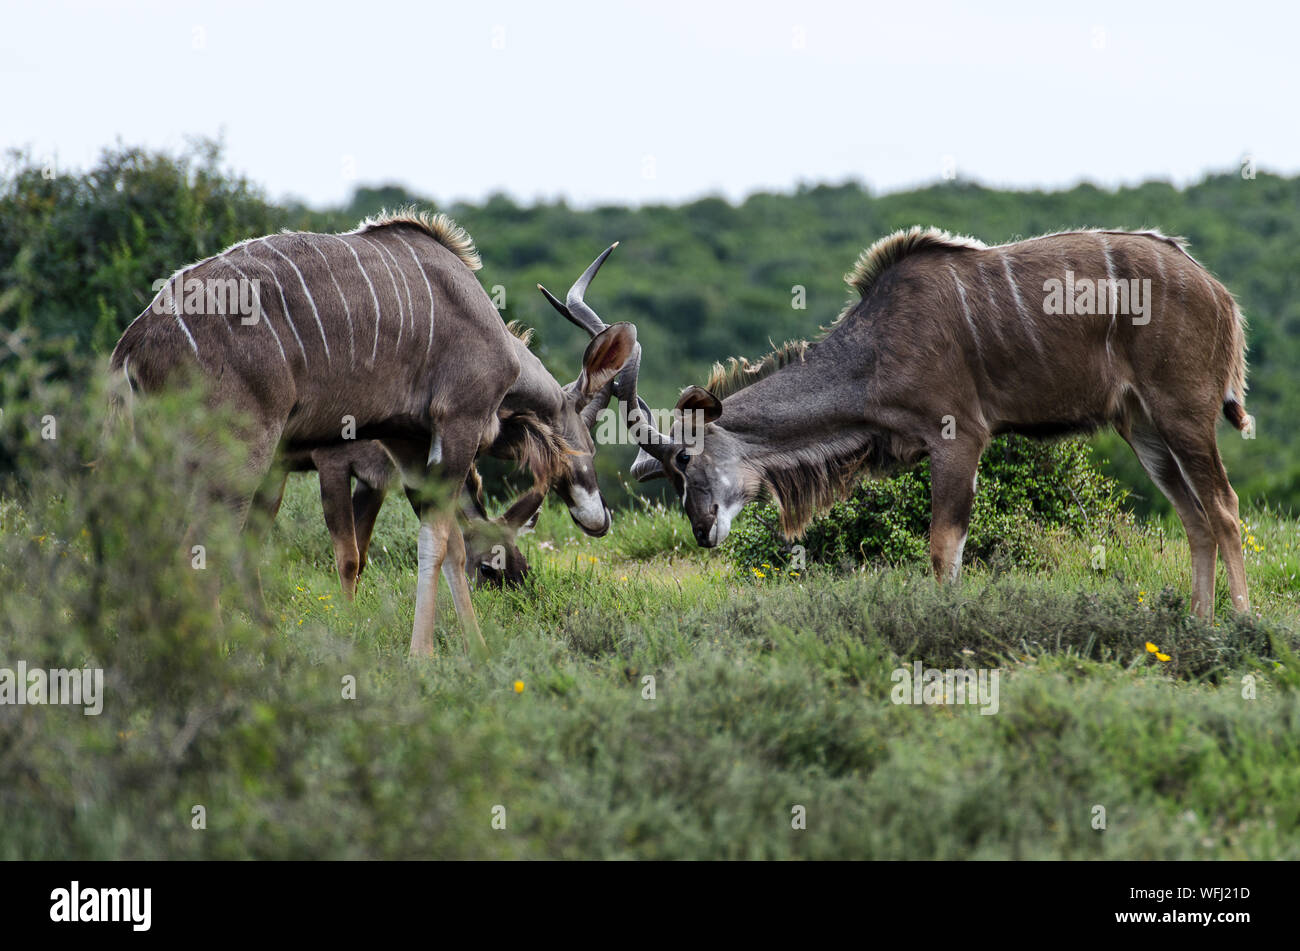 Elands Fighting On Field Stock Photo